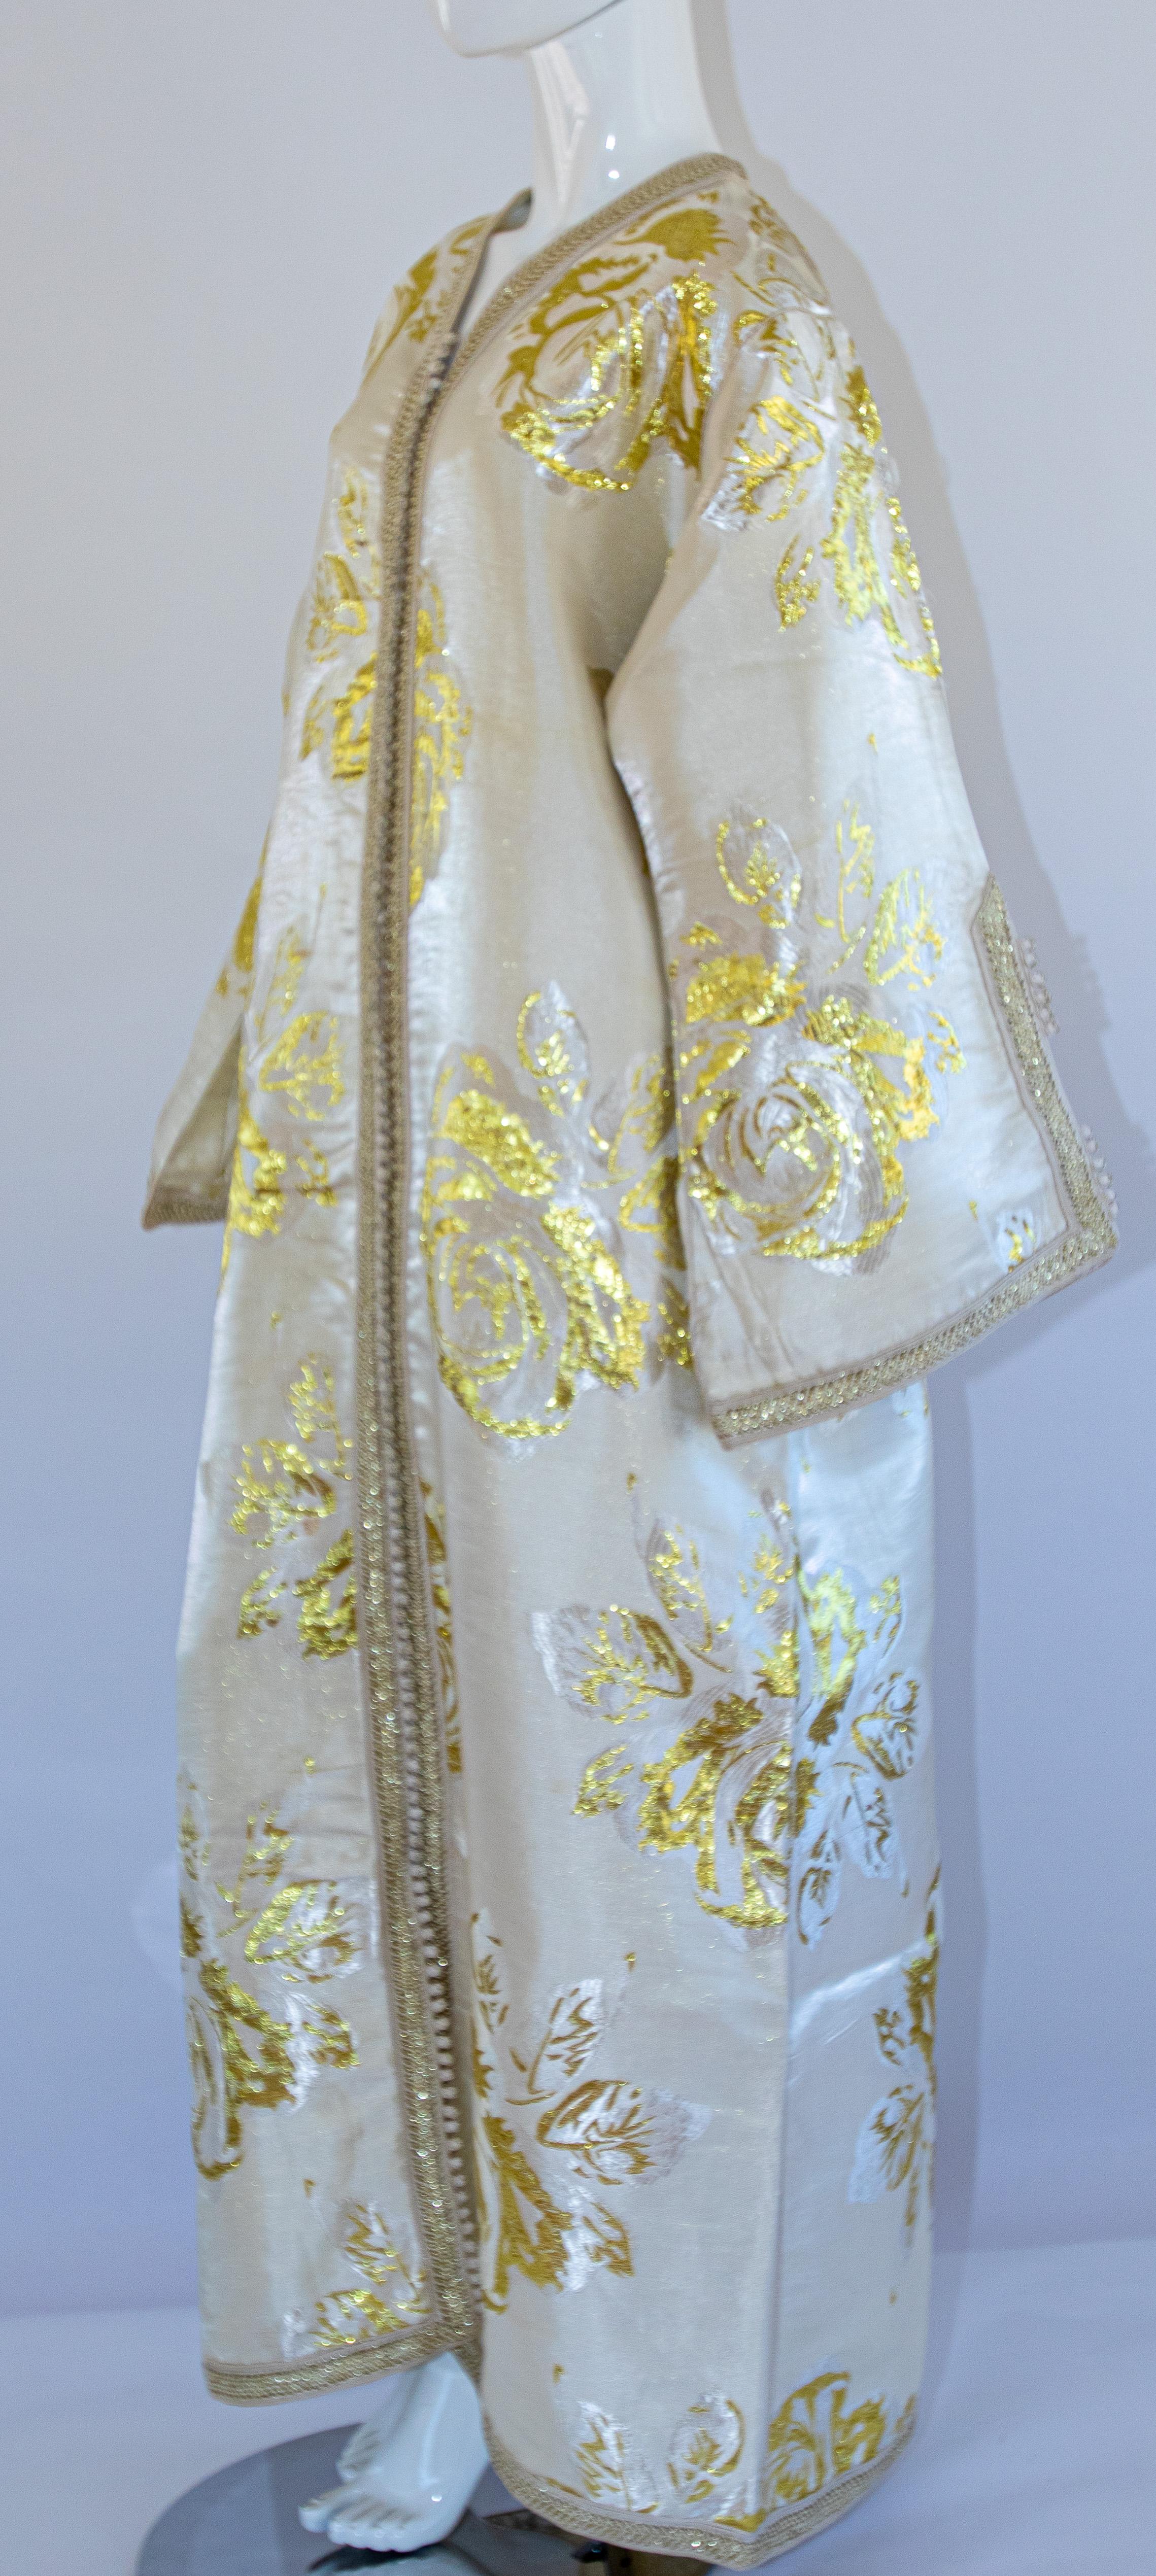 Vintage Moroccan Caftan White and Gold Metallic Floral Brocade In Good Condition For Sale In North Hollywood, CA